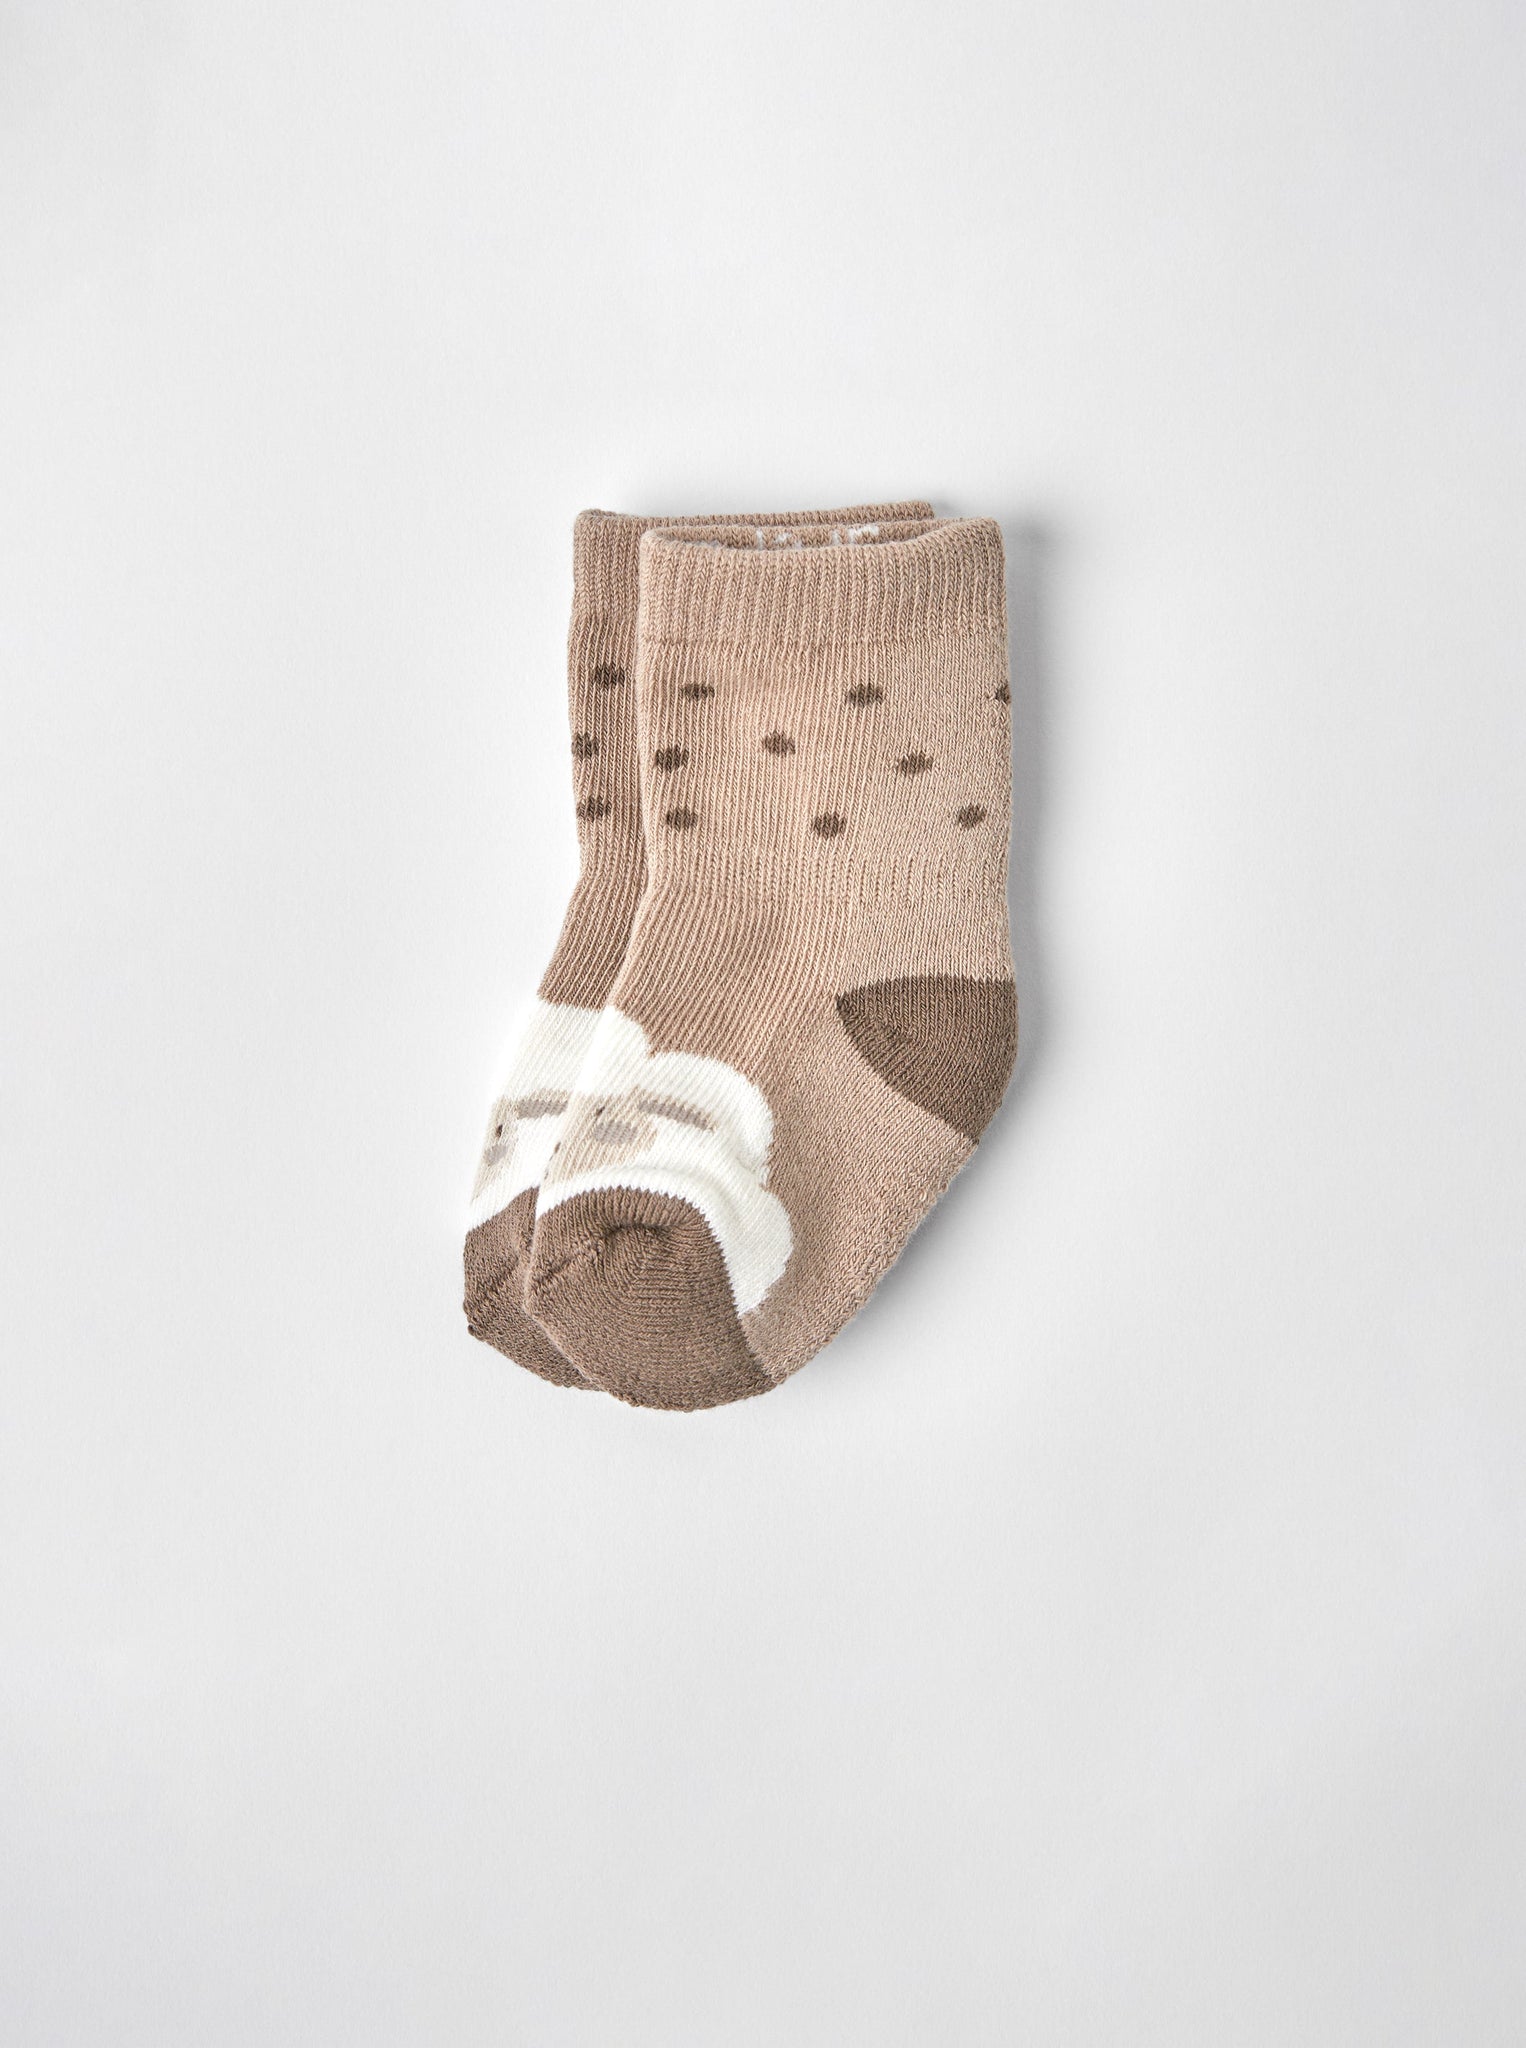 Organic Cotton Sheep Print Baby Socks from the Polarn O. Pyret babywear collection. Nordic kids clothes made from sustainable sources.